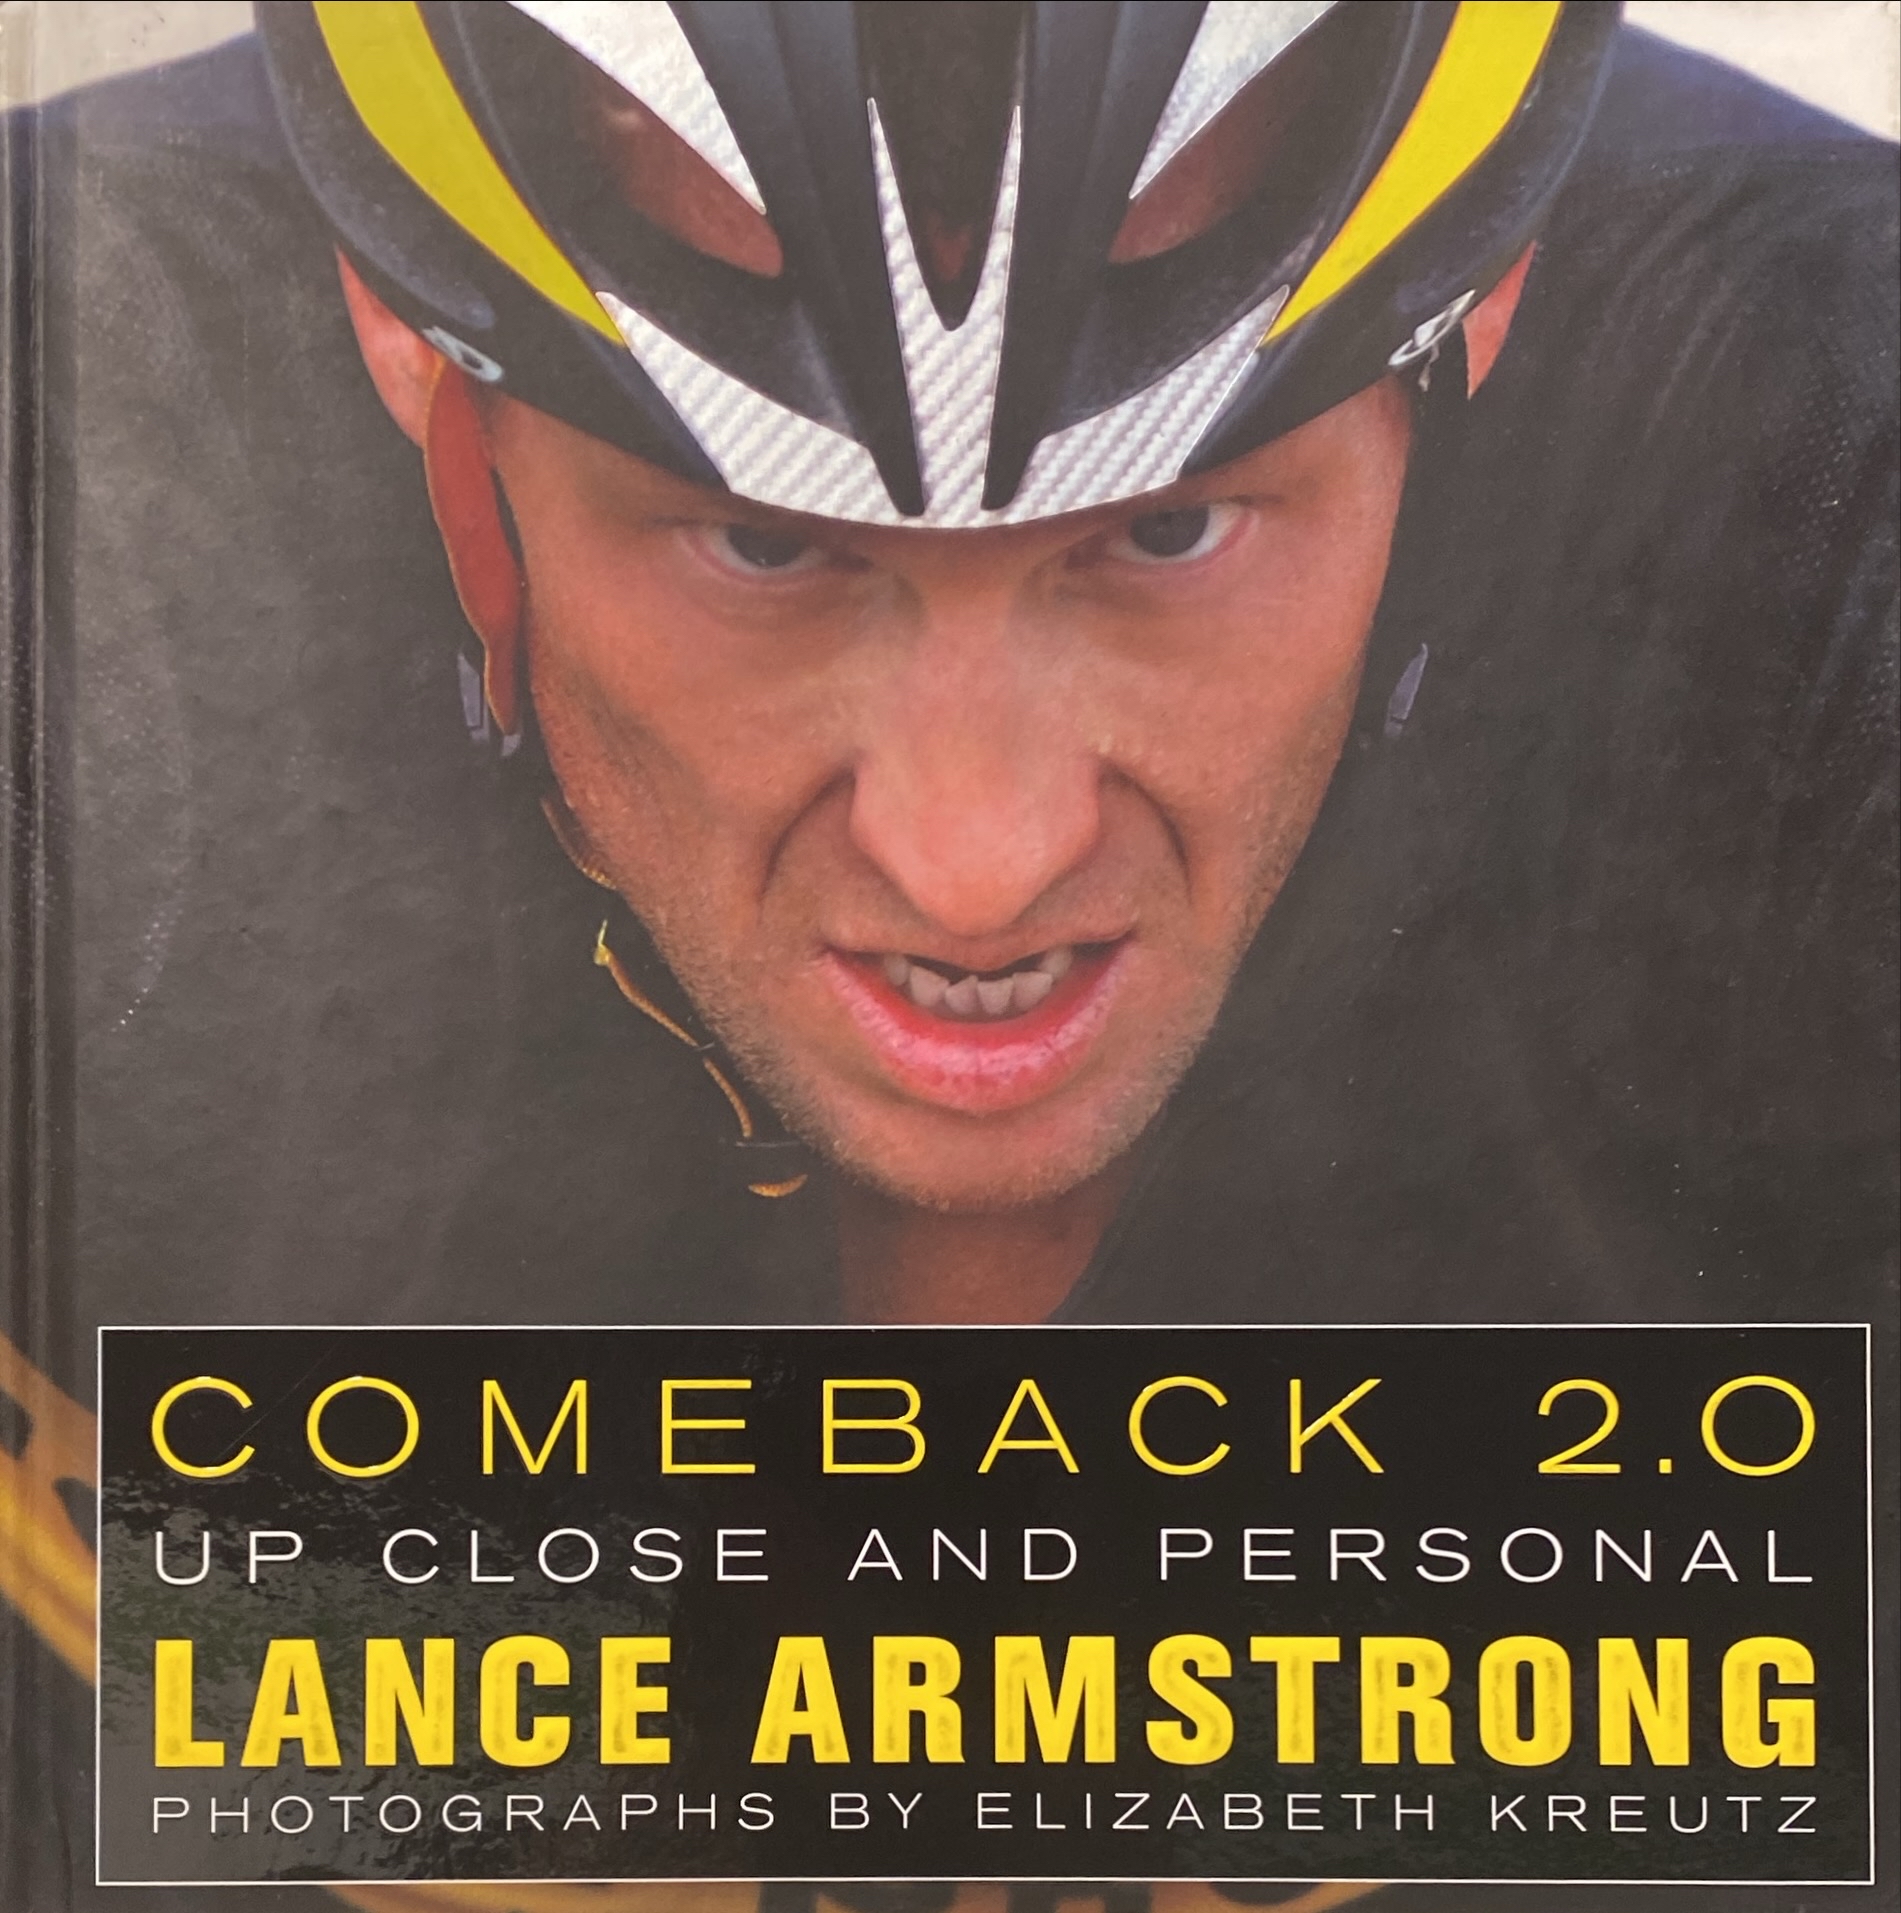 Comeback 2.0 : Up Close and Personal Lance Armstrong, Elizabeth Kreutz